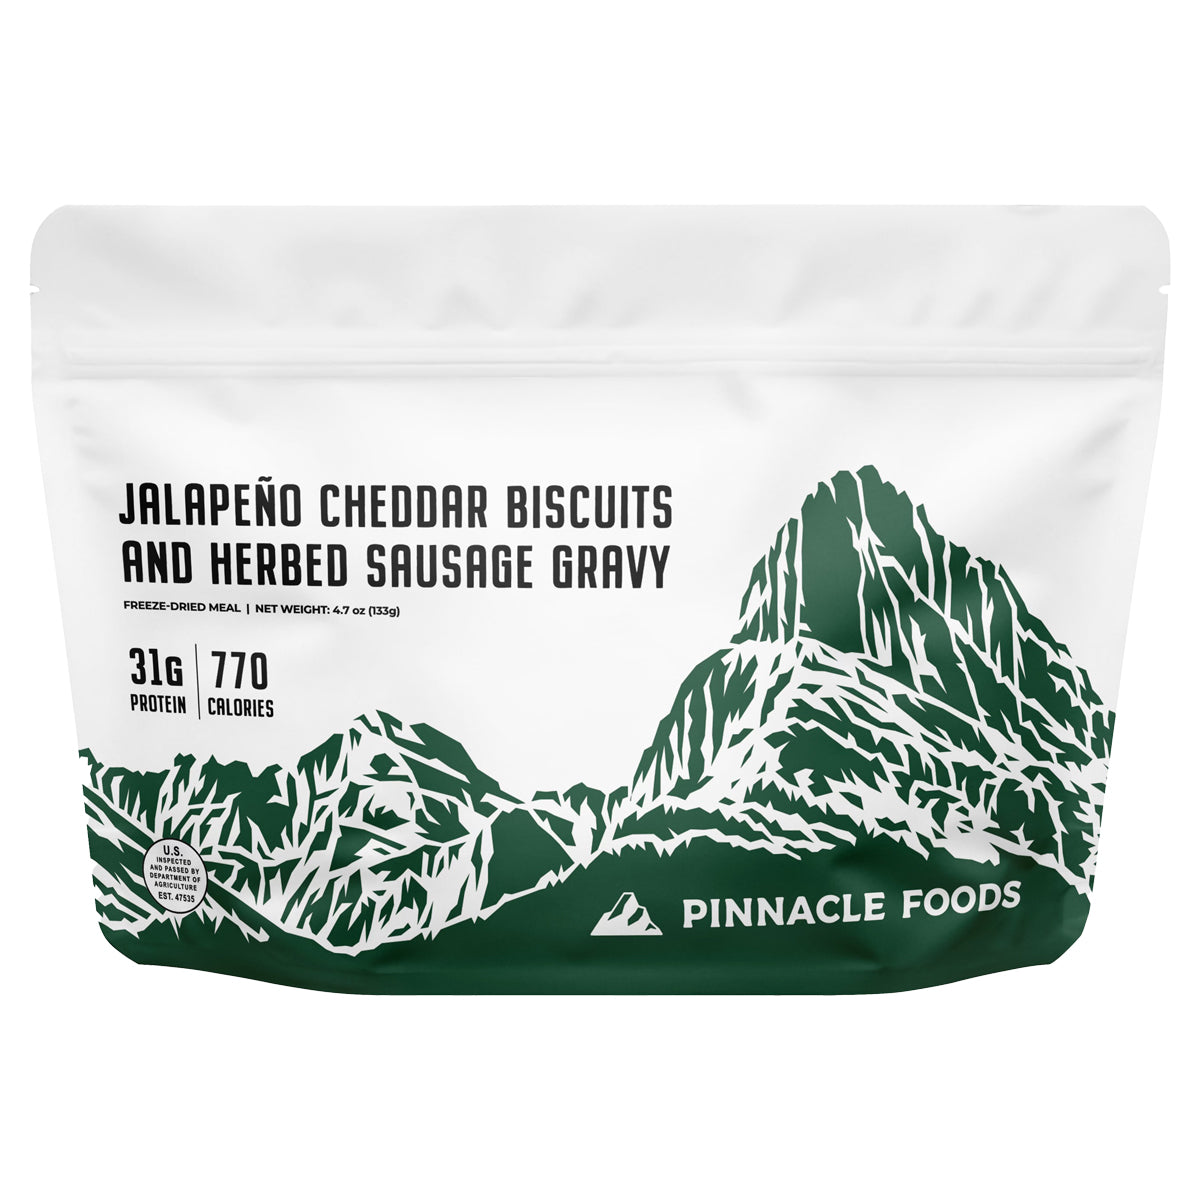 Pinnacle Foods Jalapeno Cheddar Biscuits and Herbed Sausage Gravy